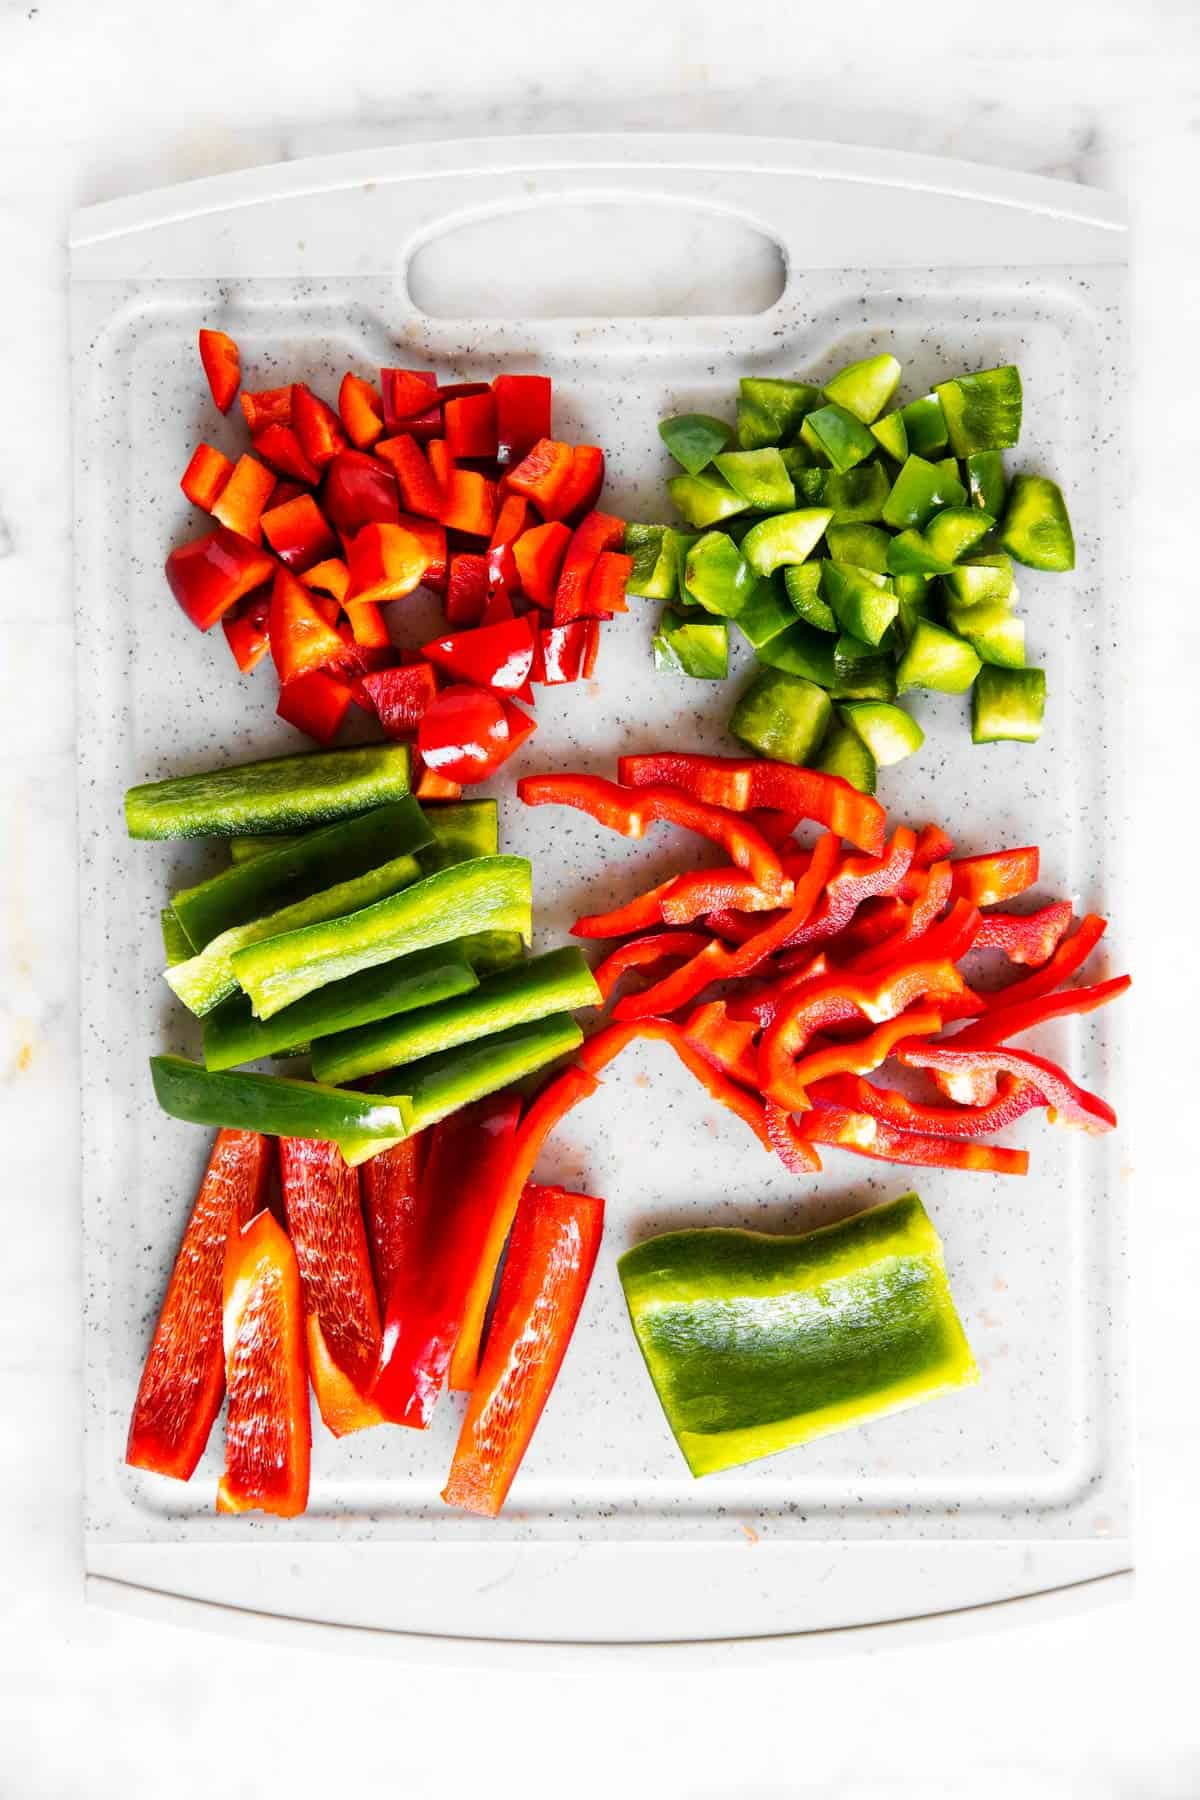 https://www.savorynothings.com/wp-content/uploads/2021/04/how-to-cut-a-bell-pepper-image-1.jpg